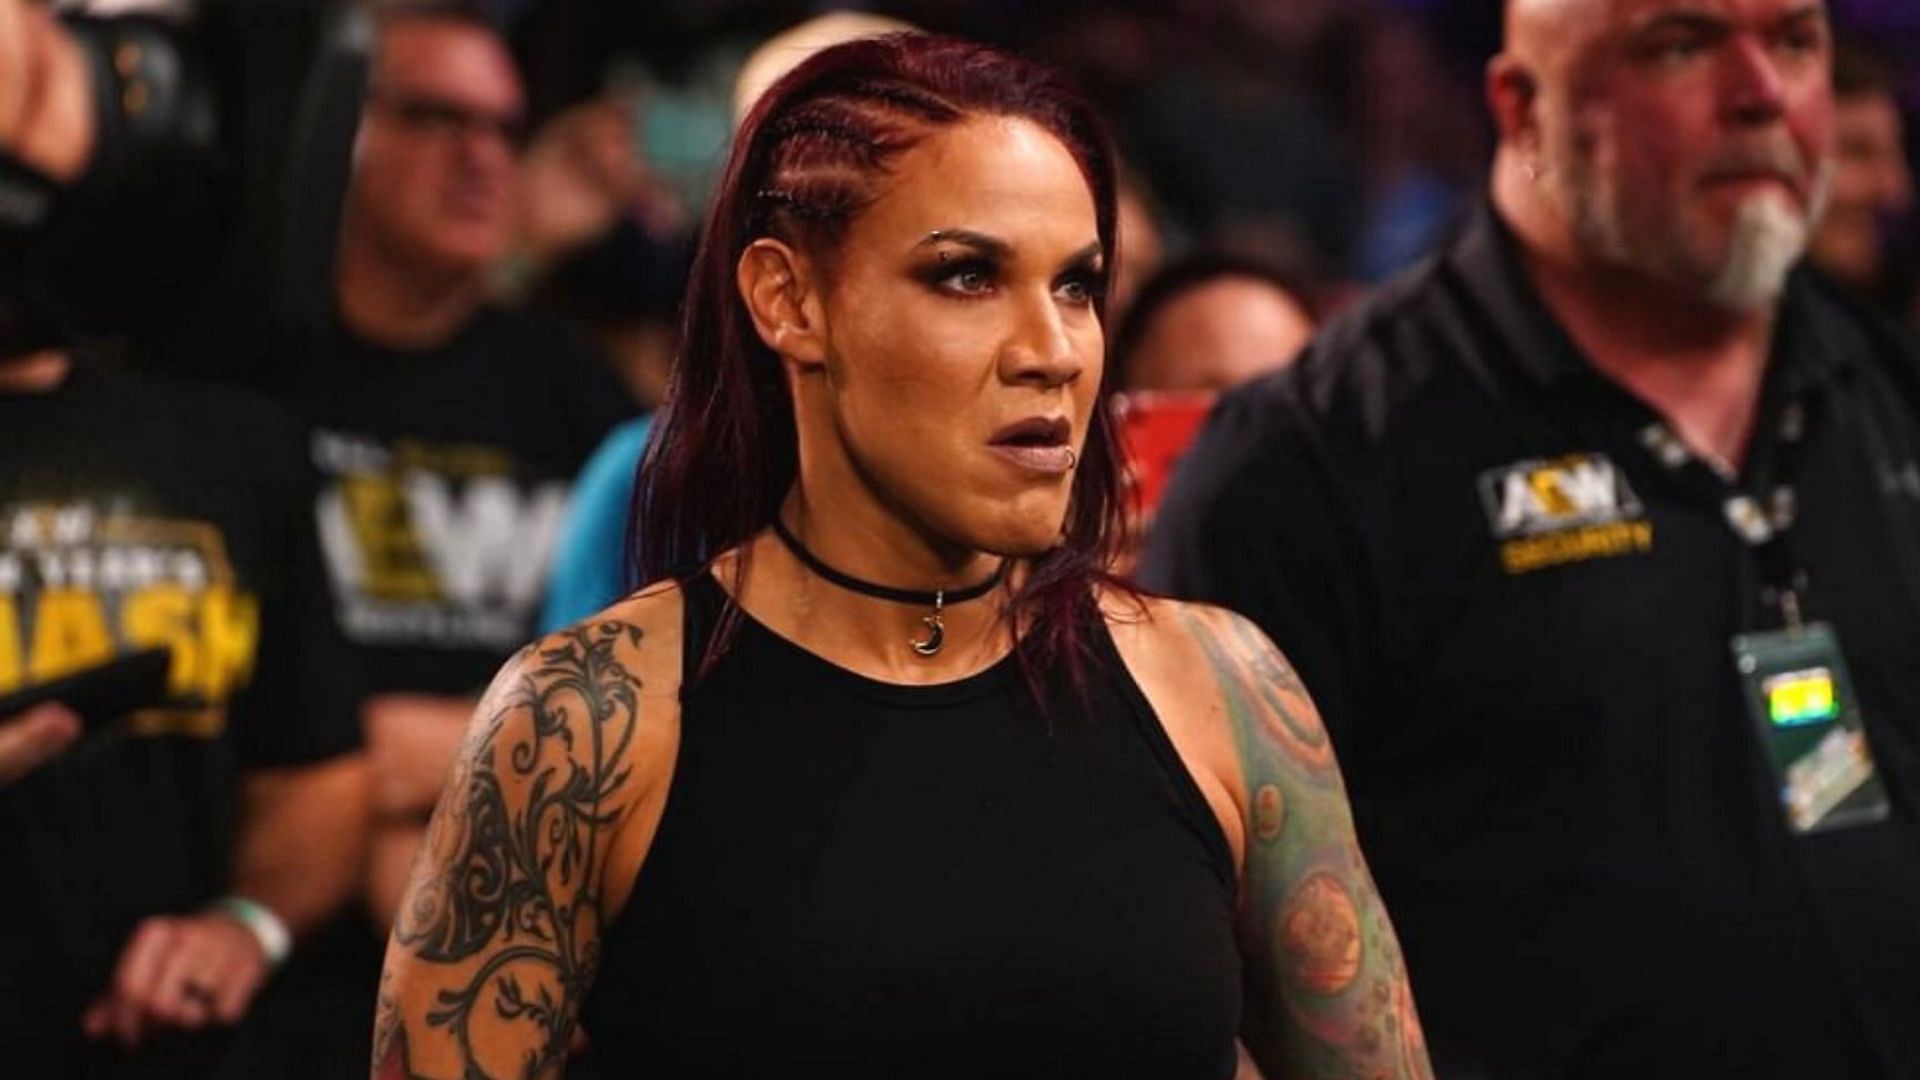 Mercedes Martinez at an AEW event in 2022